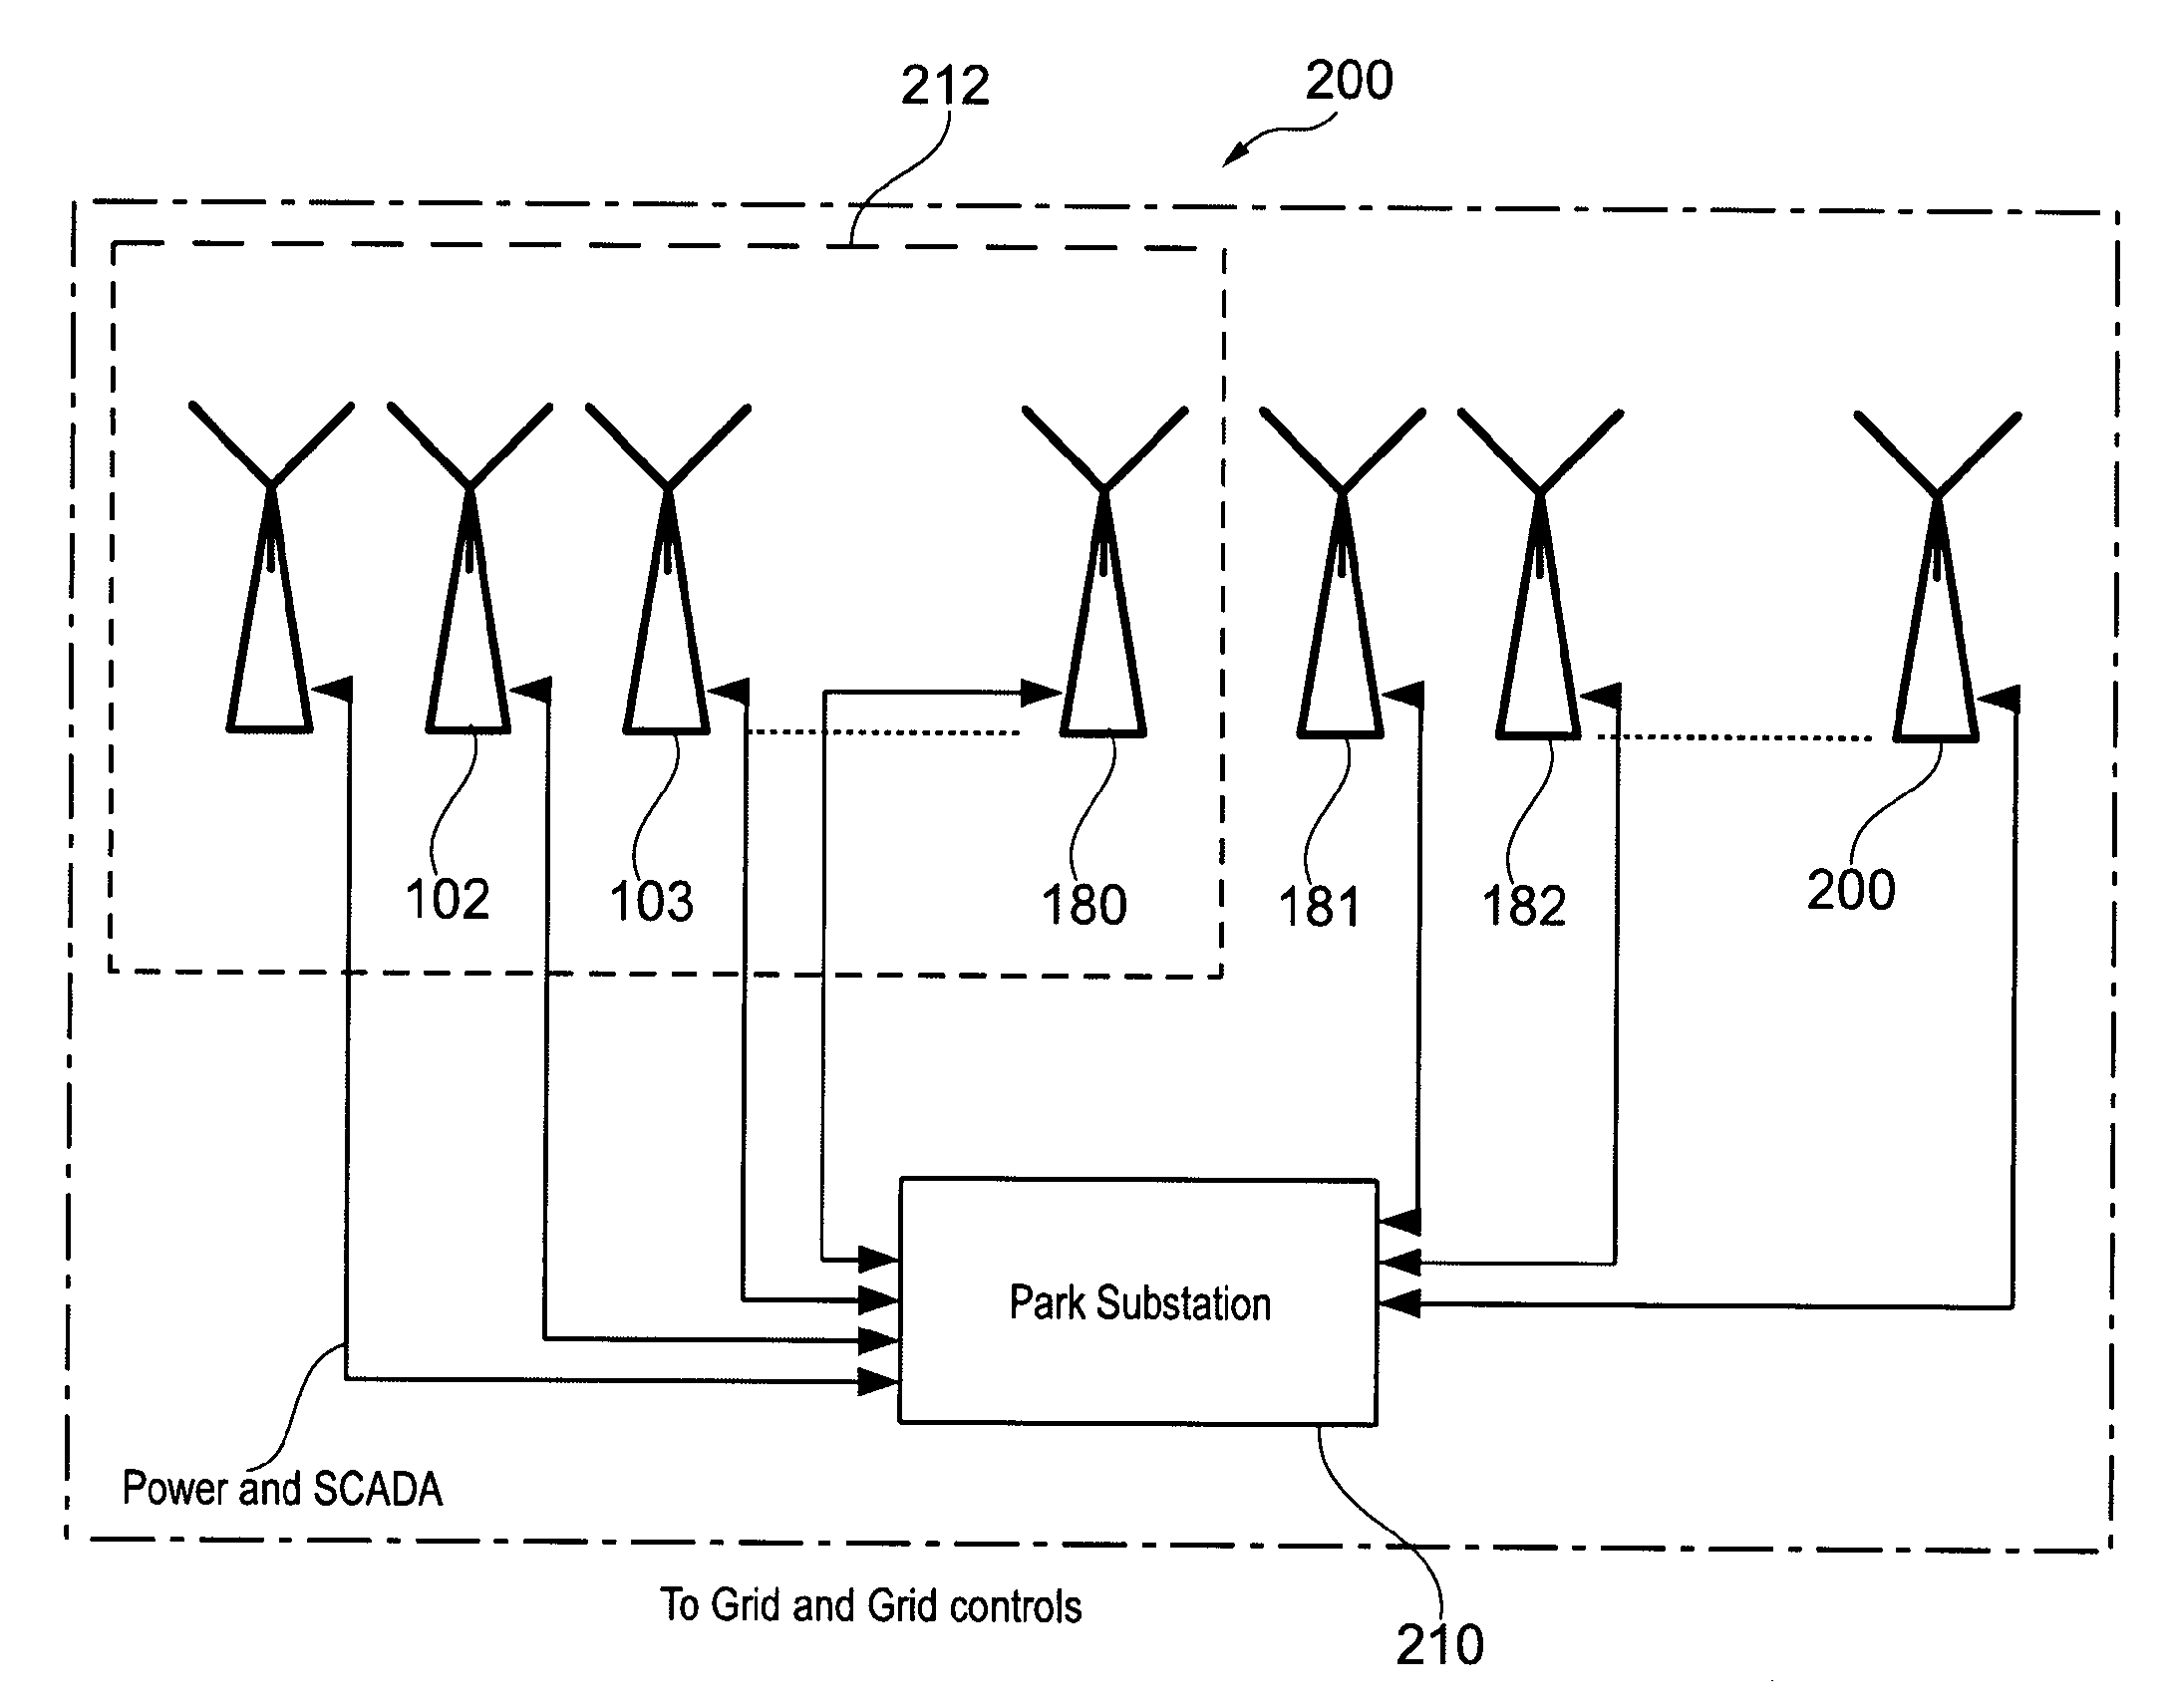 Apparatus and method for controlling the reactive power from a cluster of wind turbines connected to a utility grid